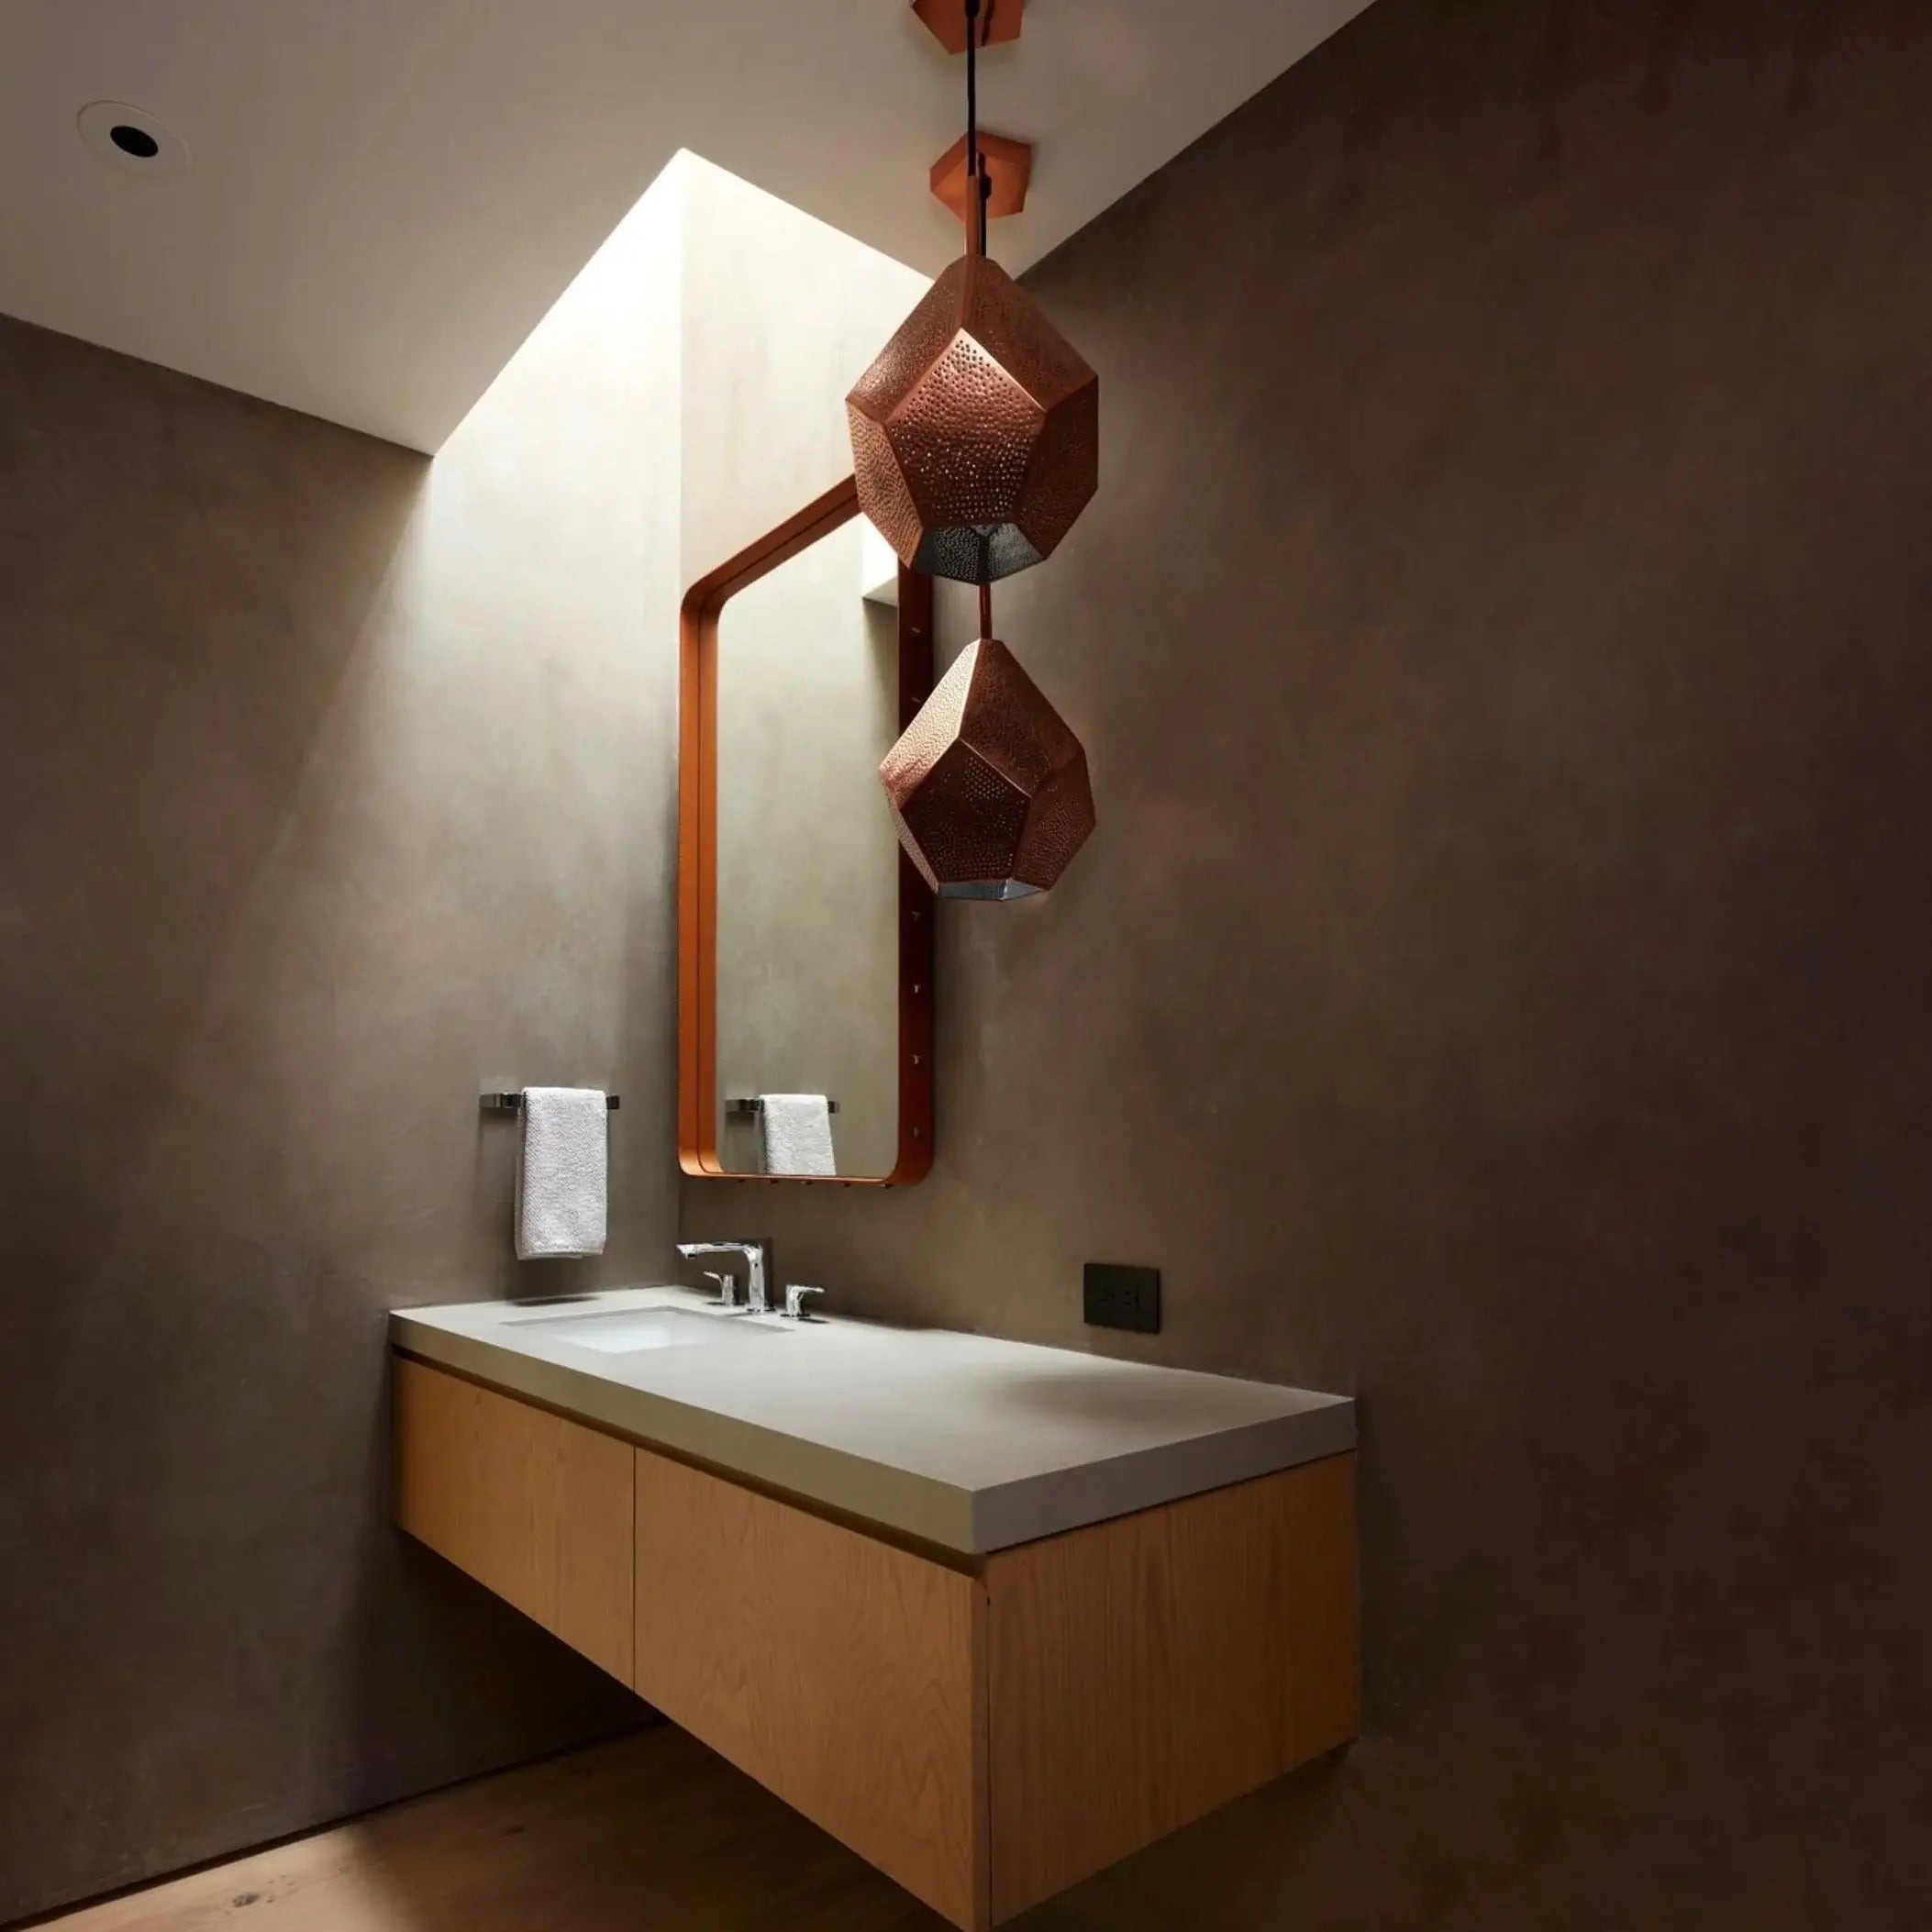 Dounia home Pendant light in Polished Copper made of metal, used as a bathroom lighting, Model: Almas